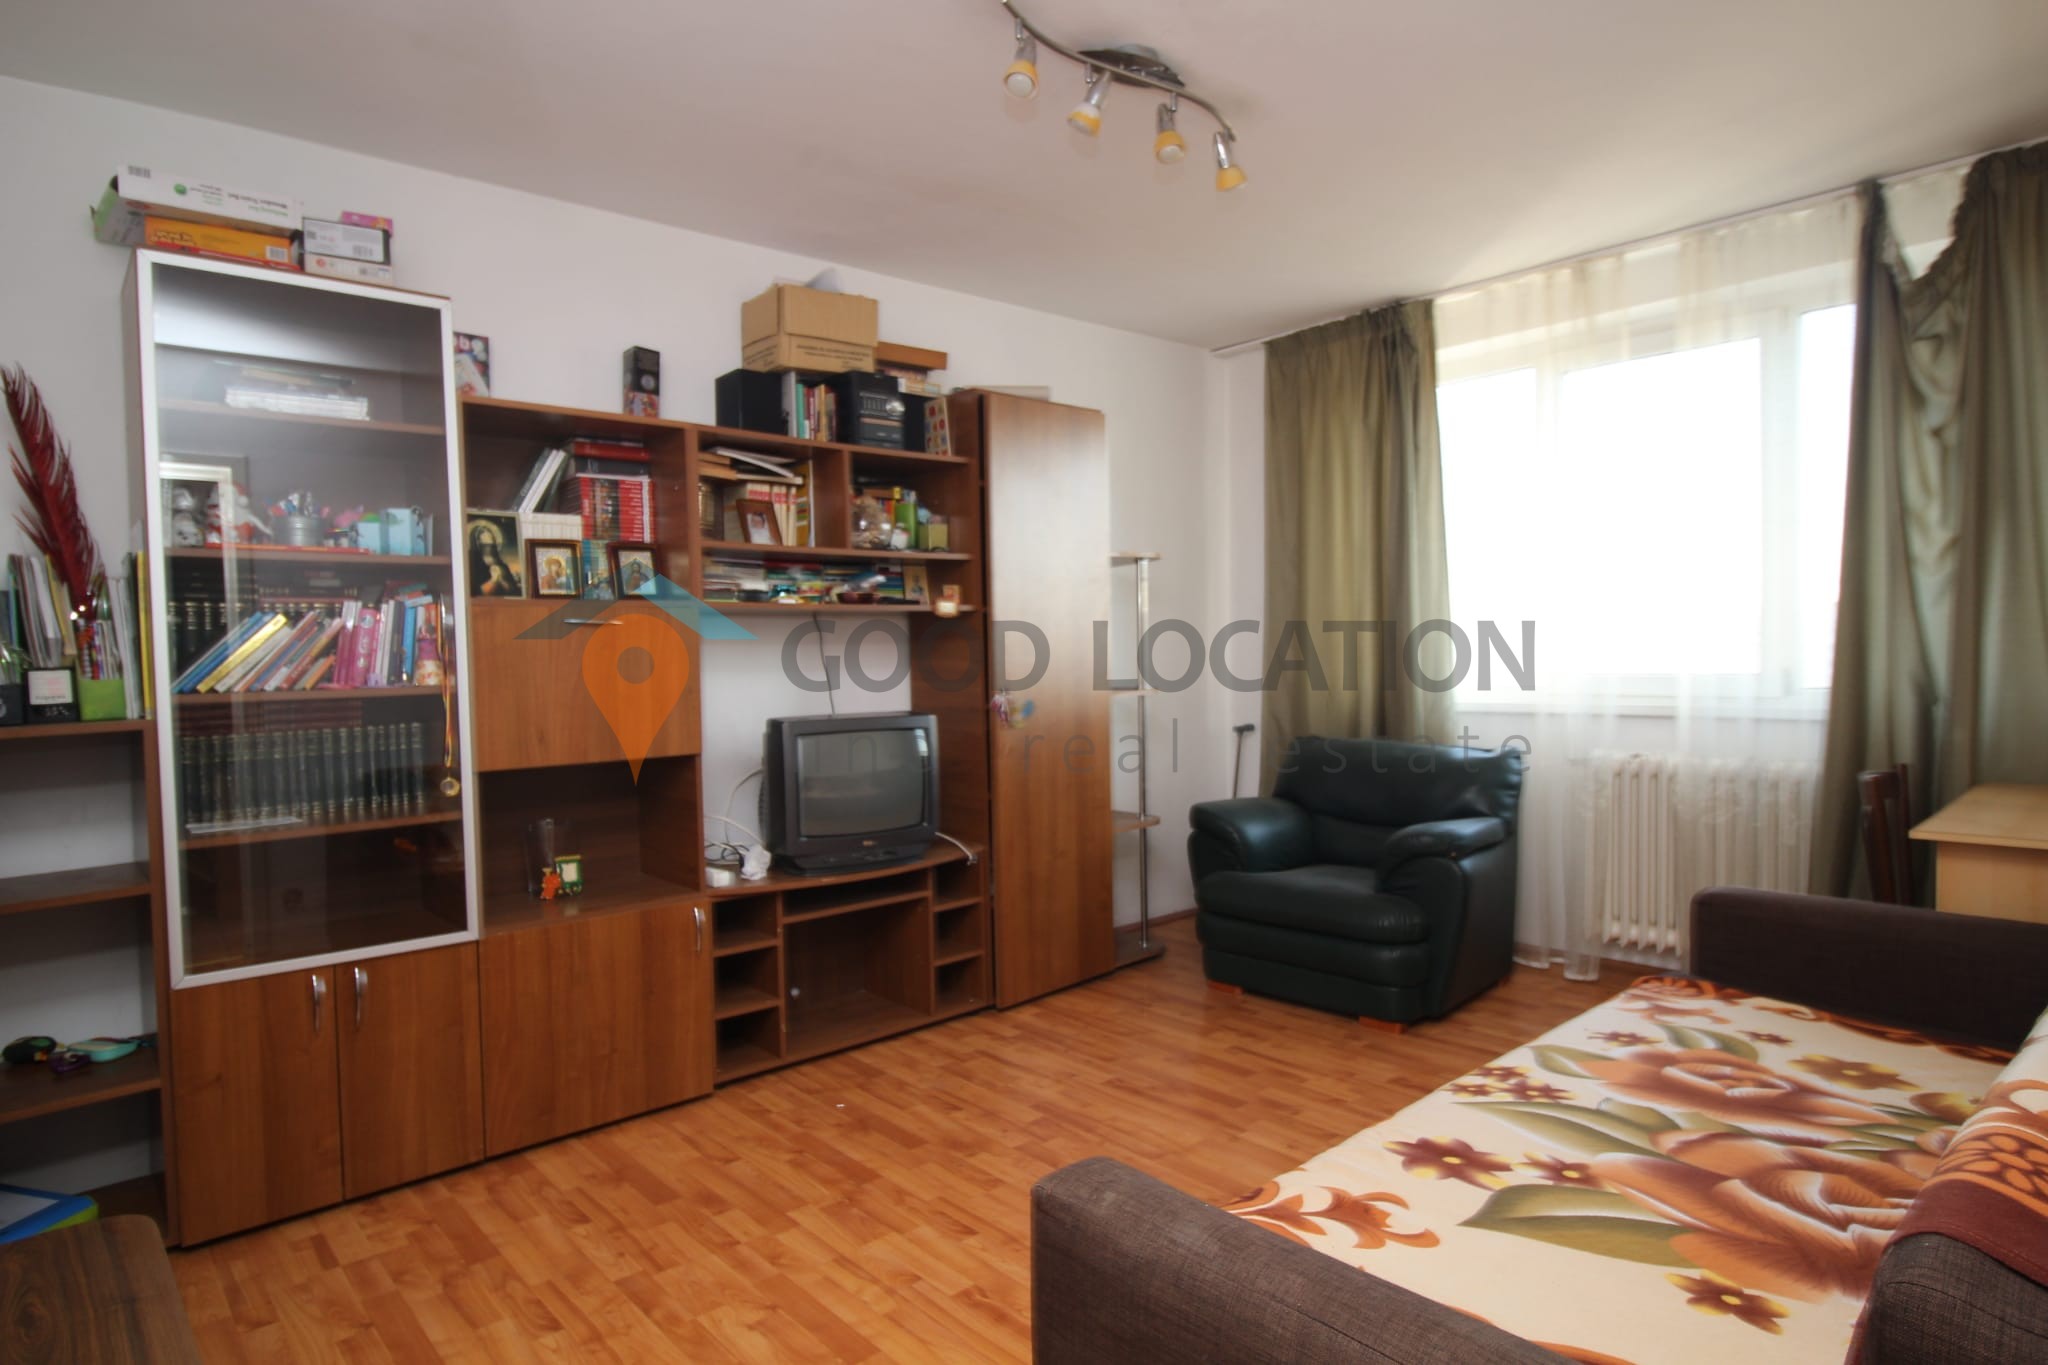 Apartment for sale, Berceni, 2 bedrooms, furnished